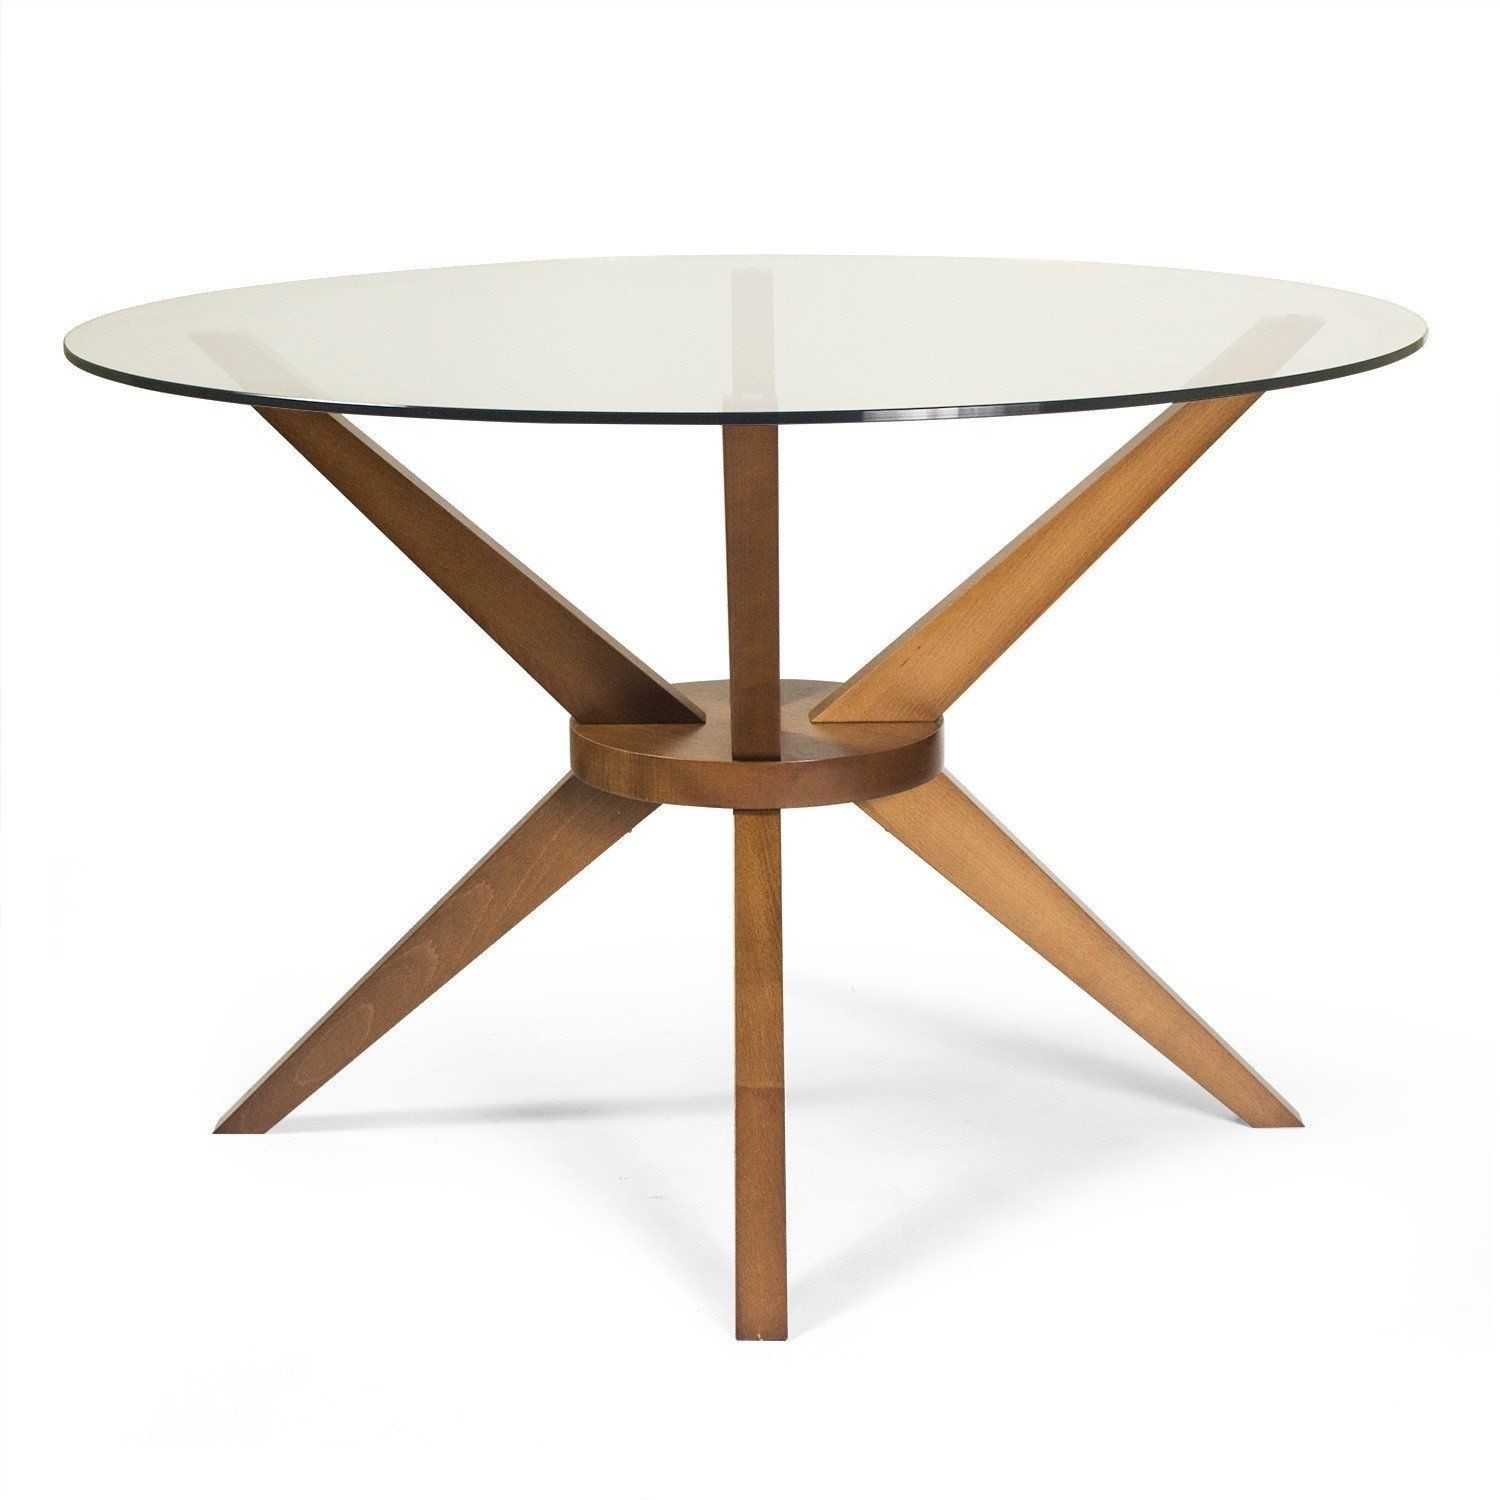 Aeon bianca dining table glass round dining table glass